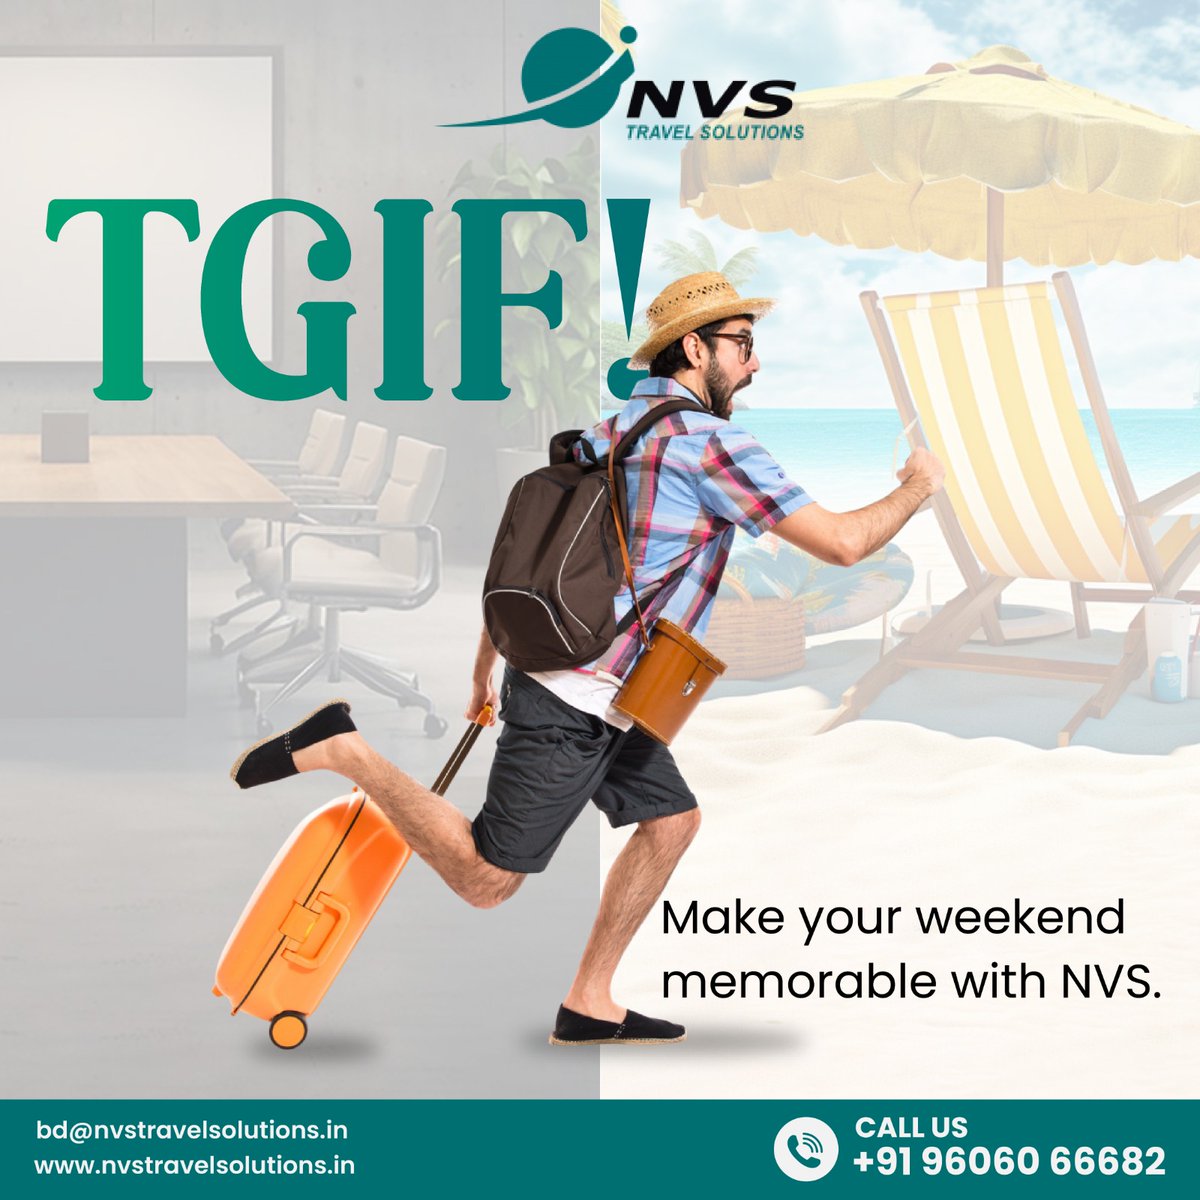 Start your weekend in style with NVS Rent-A-Cab! Reliable cabs for memorable journeys. Let NVS be your fun ride!
Get in touch: +91 9606066682

#nvstravel #nvstravelsolutions #carrental #carrentalservice #CarRentalWithDriver #RentACab #rentalcars #rentacab